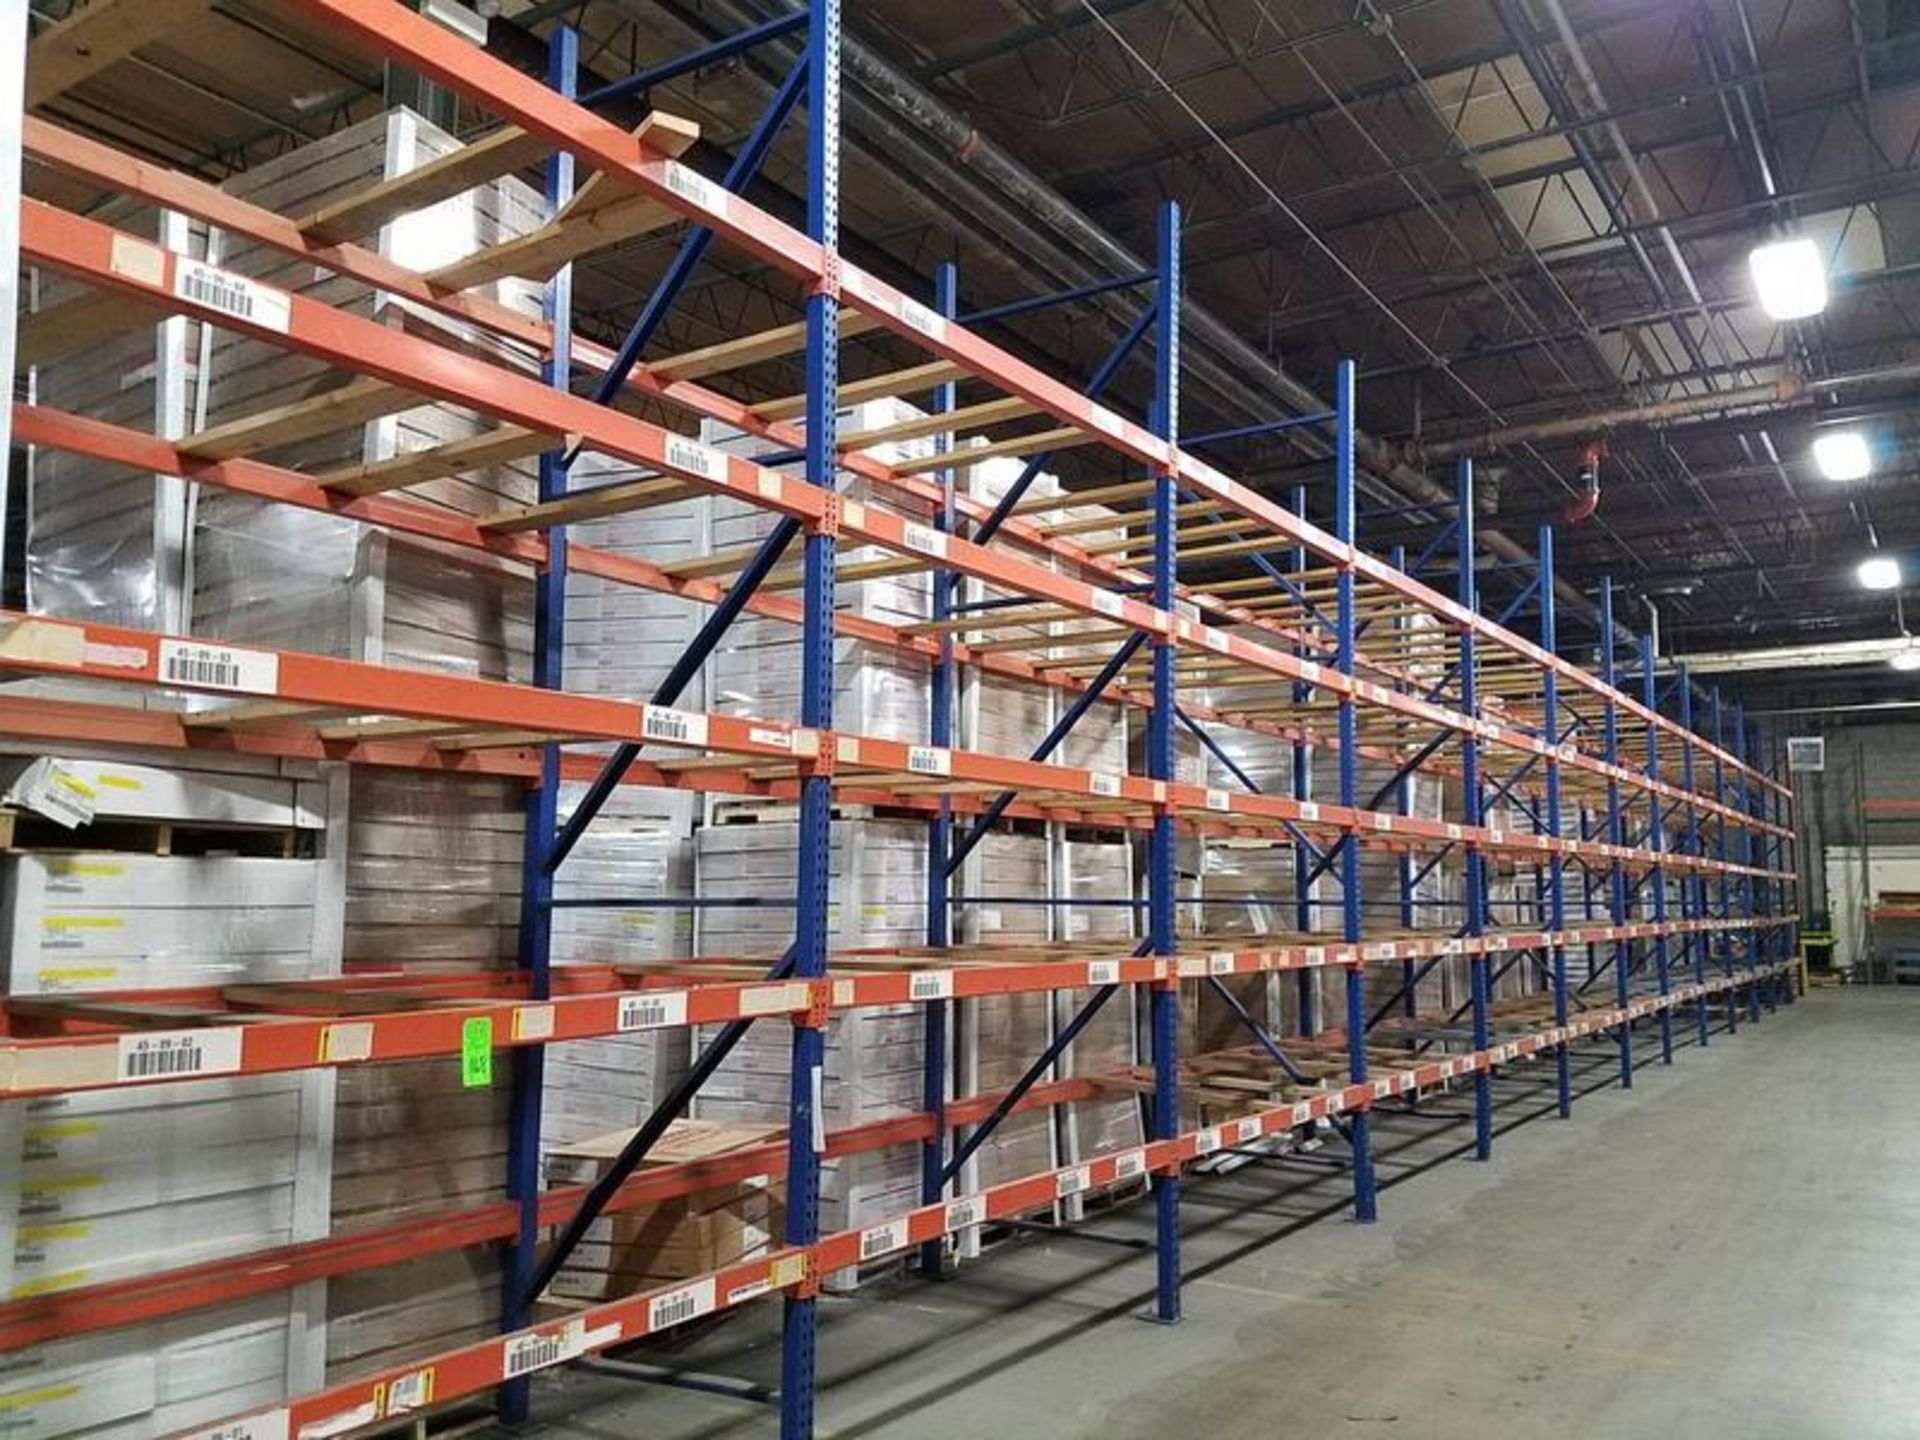 LOT (13) Sections of Adjustable Pallet Racking, 8' x 54" x 19'H (approx.), Contents Not Included